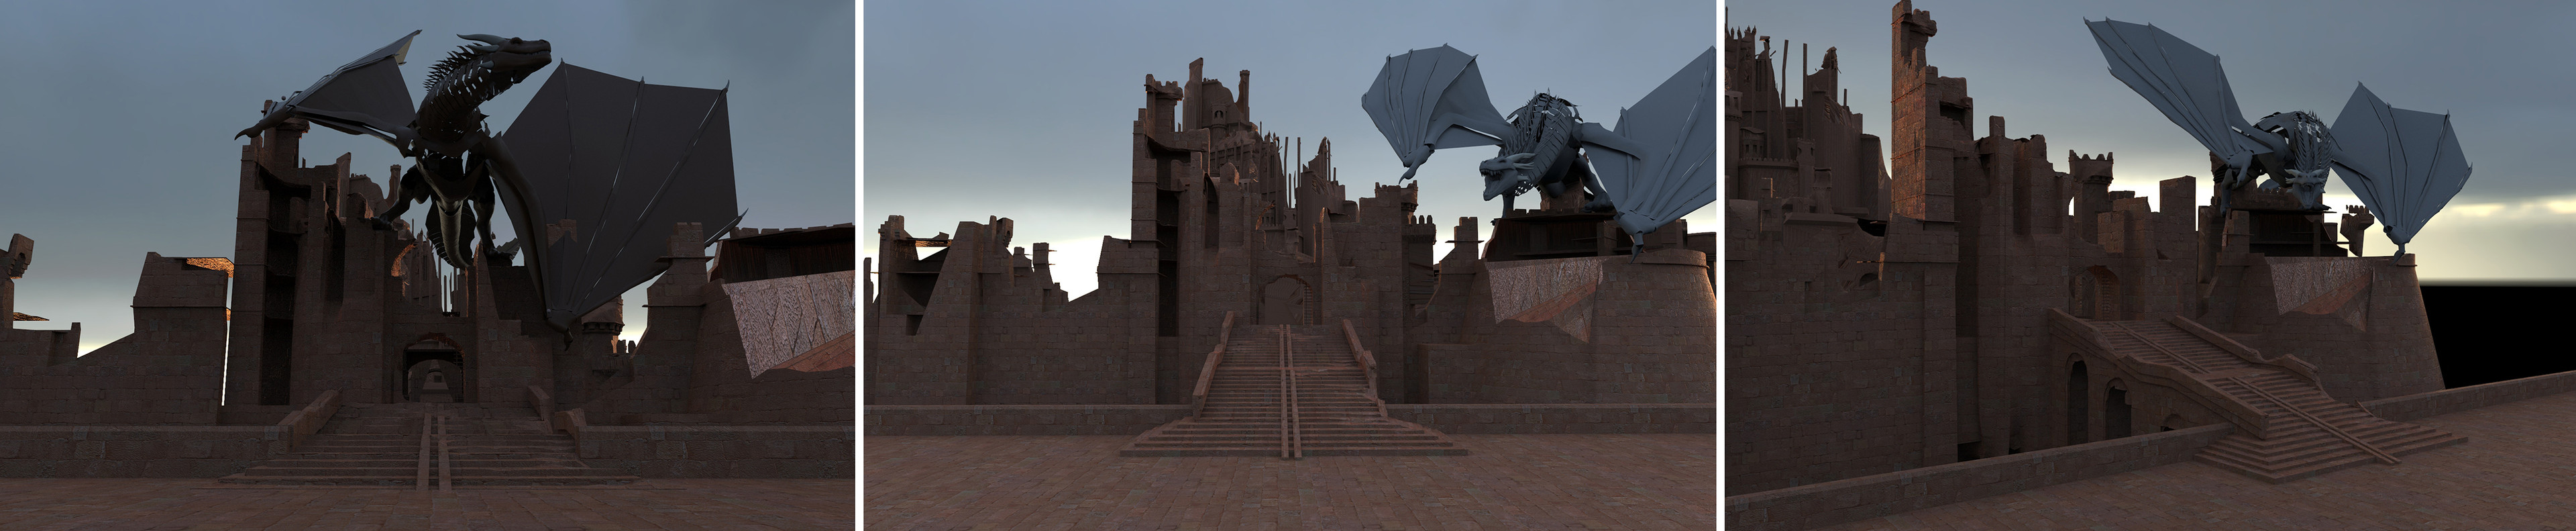 Early renders of the Red Keep gate model 